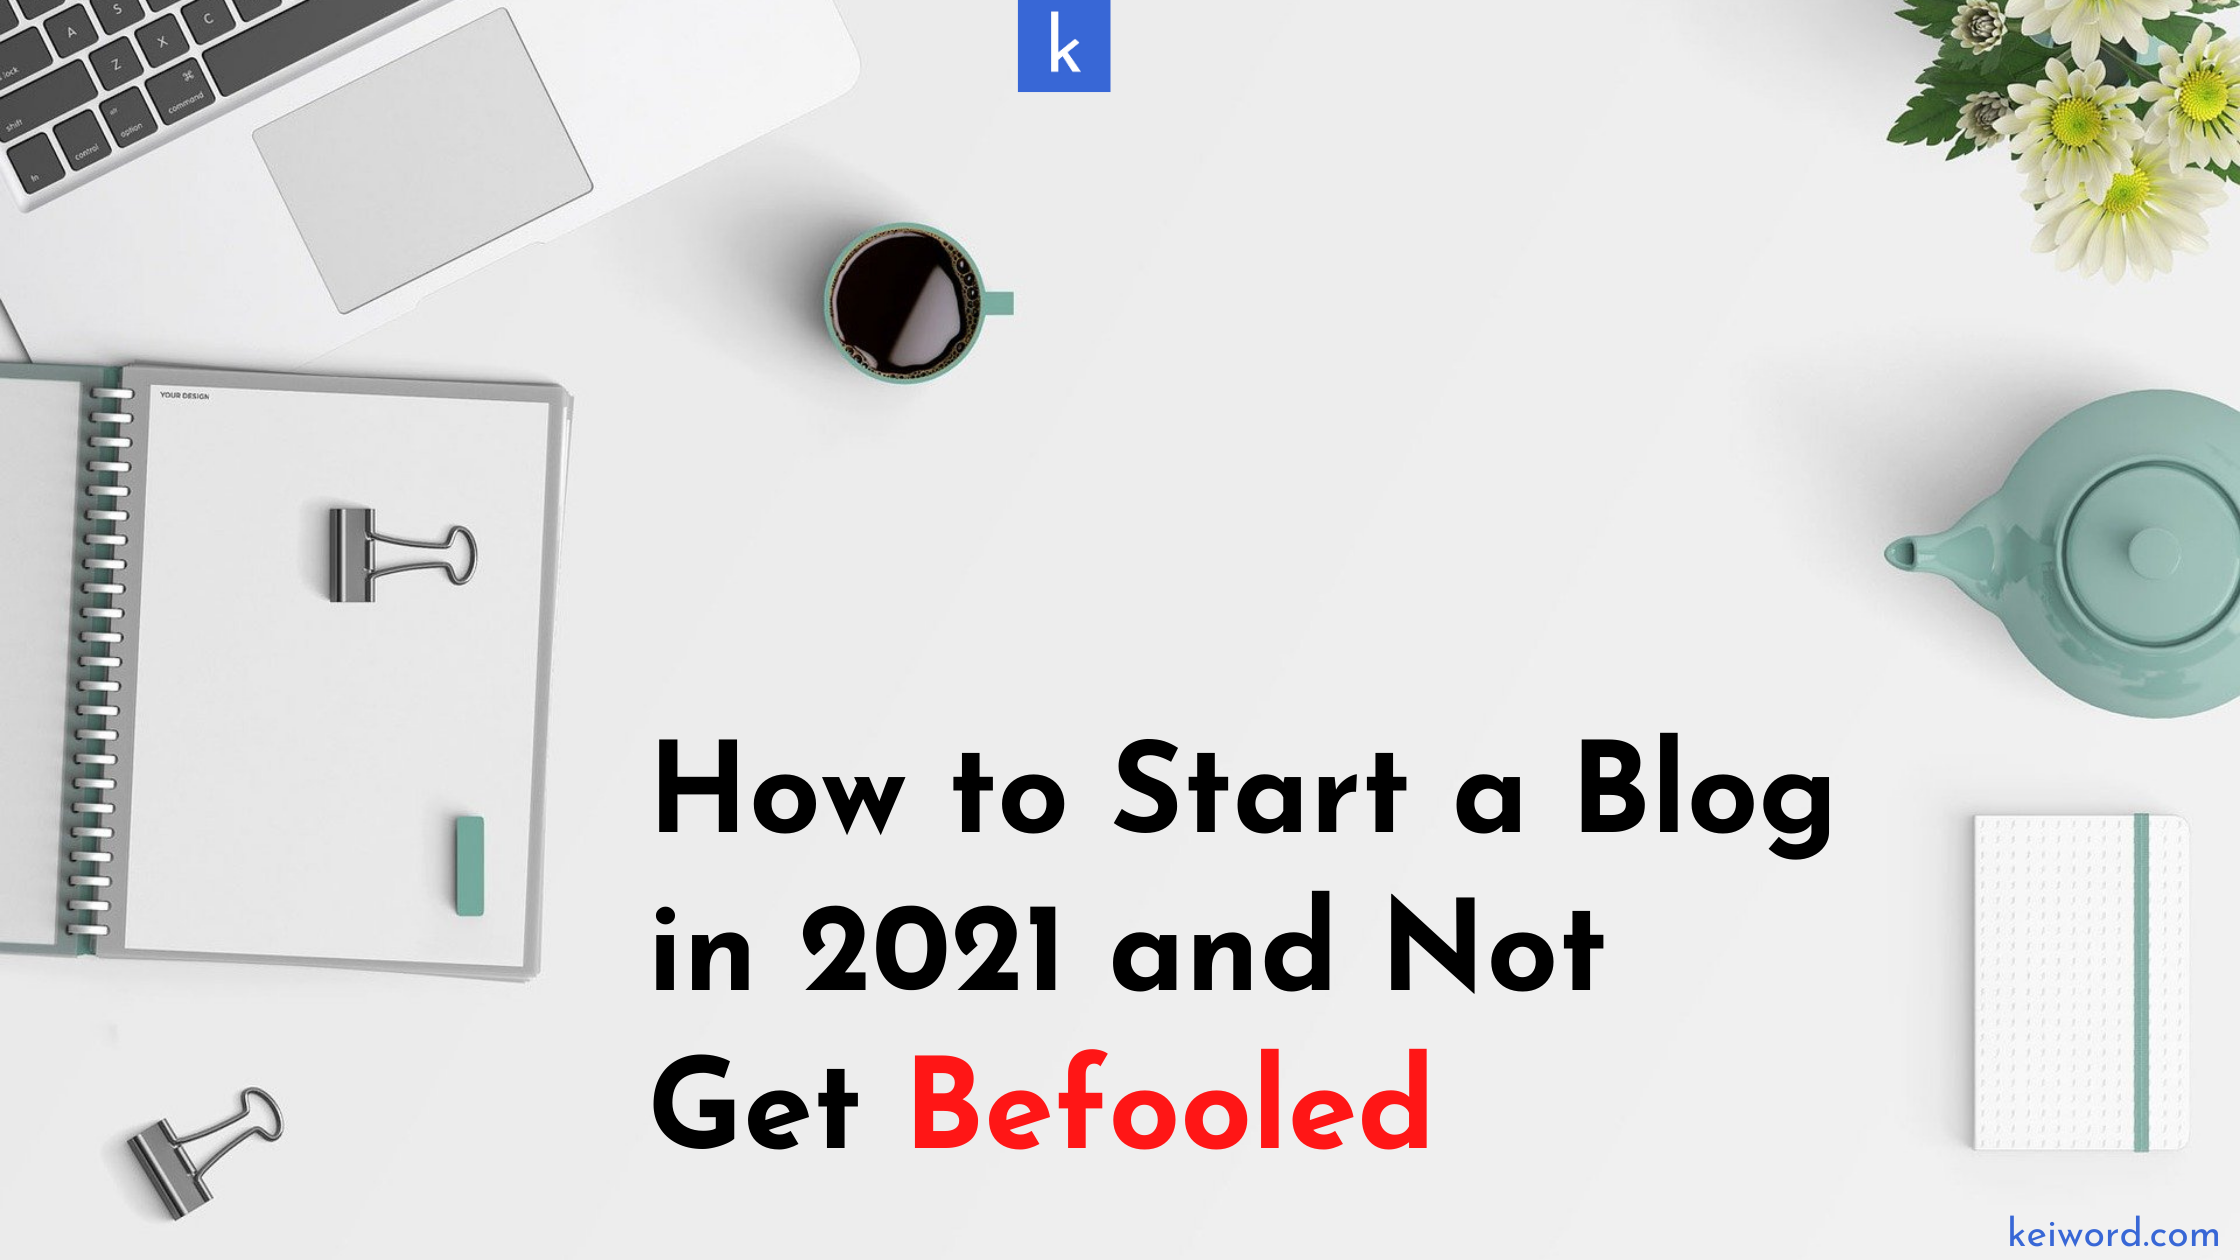 How to Start a Blog in 2021 and Not Get Befooled